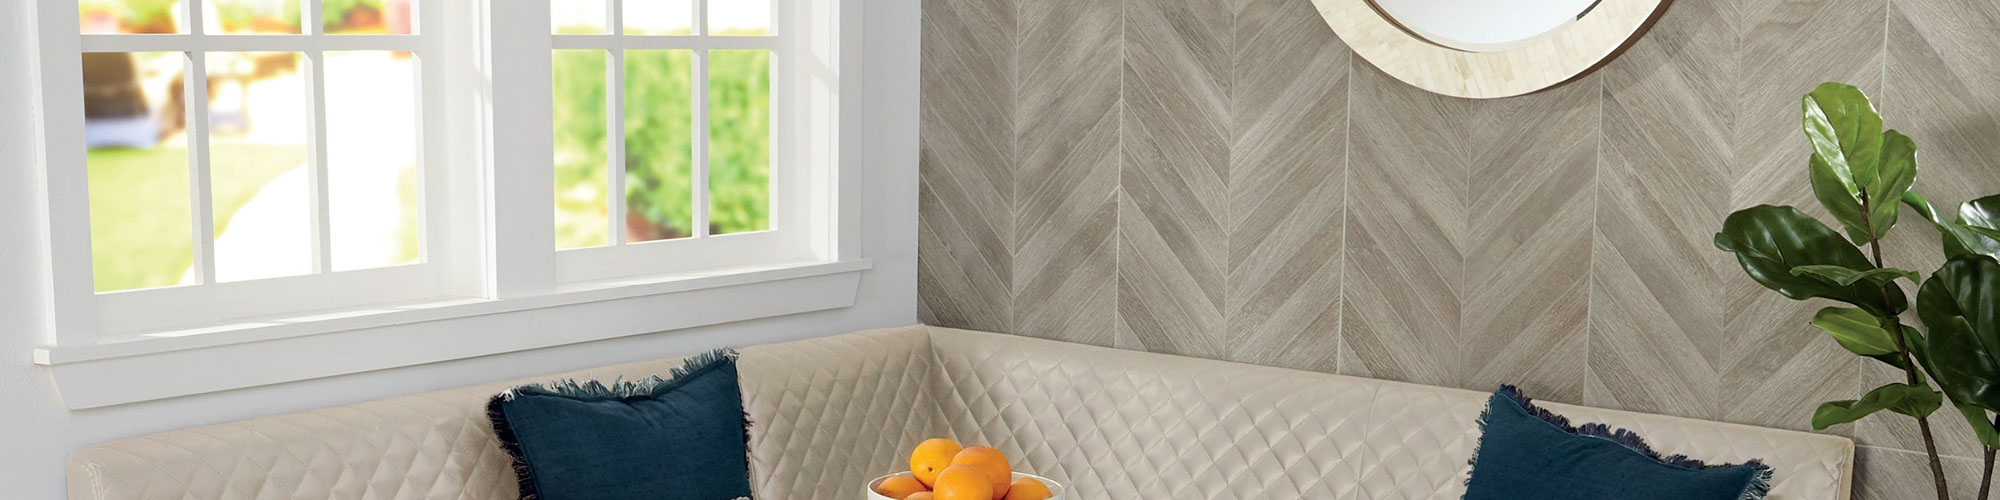 Closeup of wall tile that looks like wood, laid in a chevron pattern, beige tufted booth with navy pillows, white framed windows.